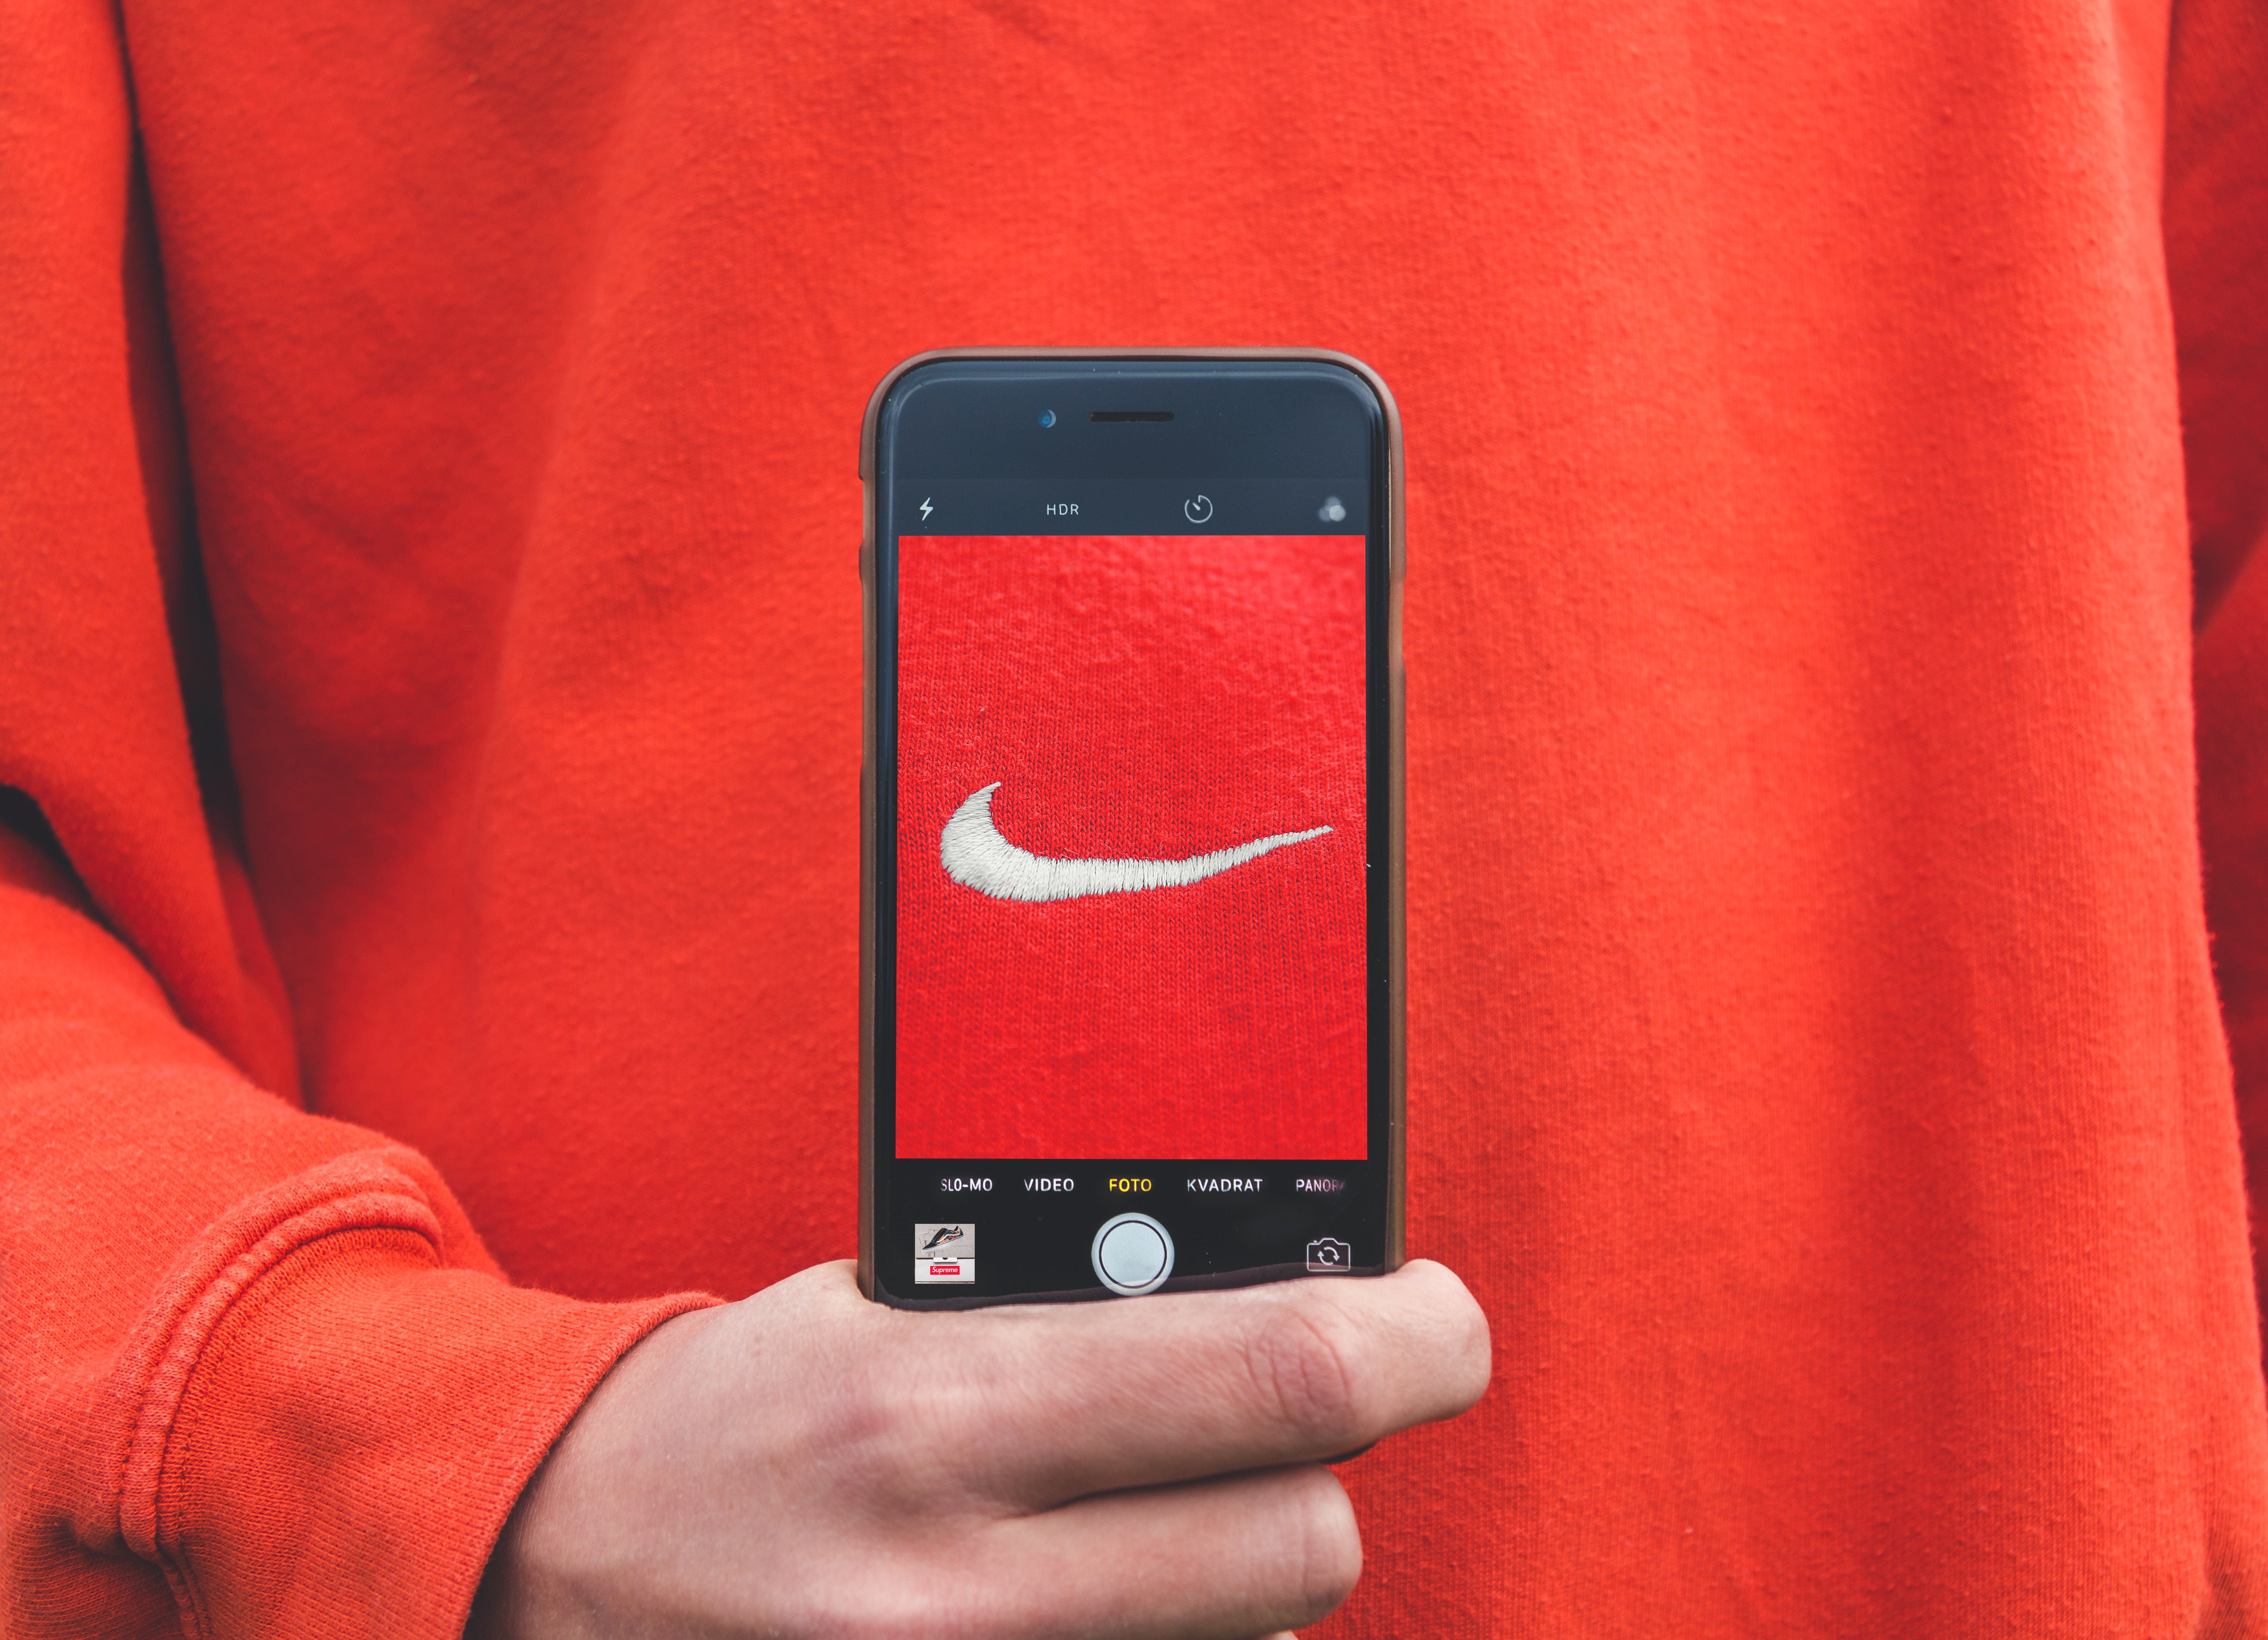 Person with cellphone and Nike logo; image by Kristian Egelund, via Unsplash.com.